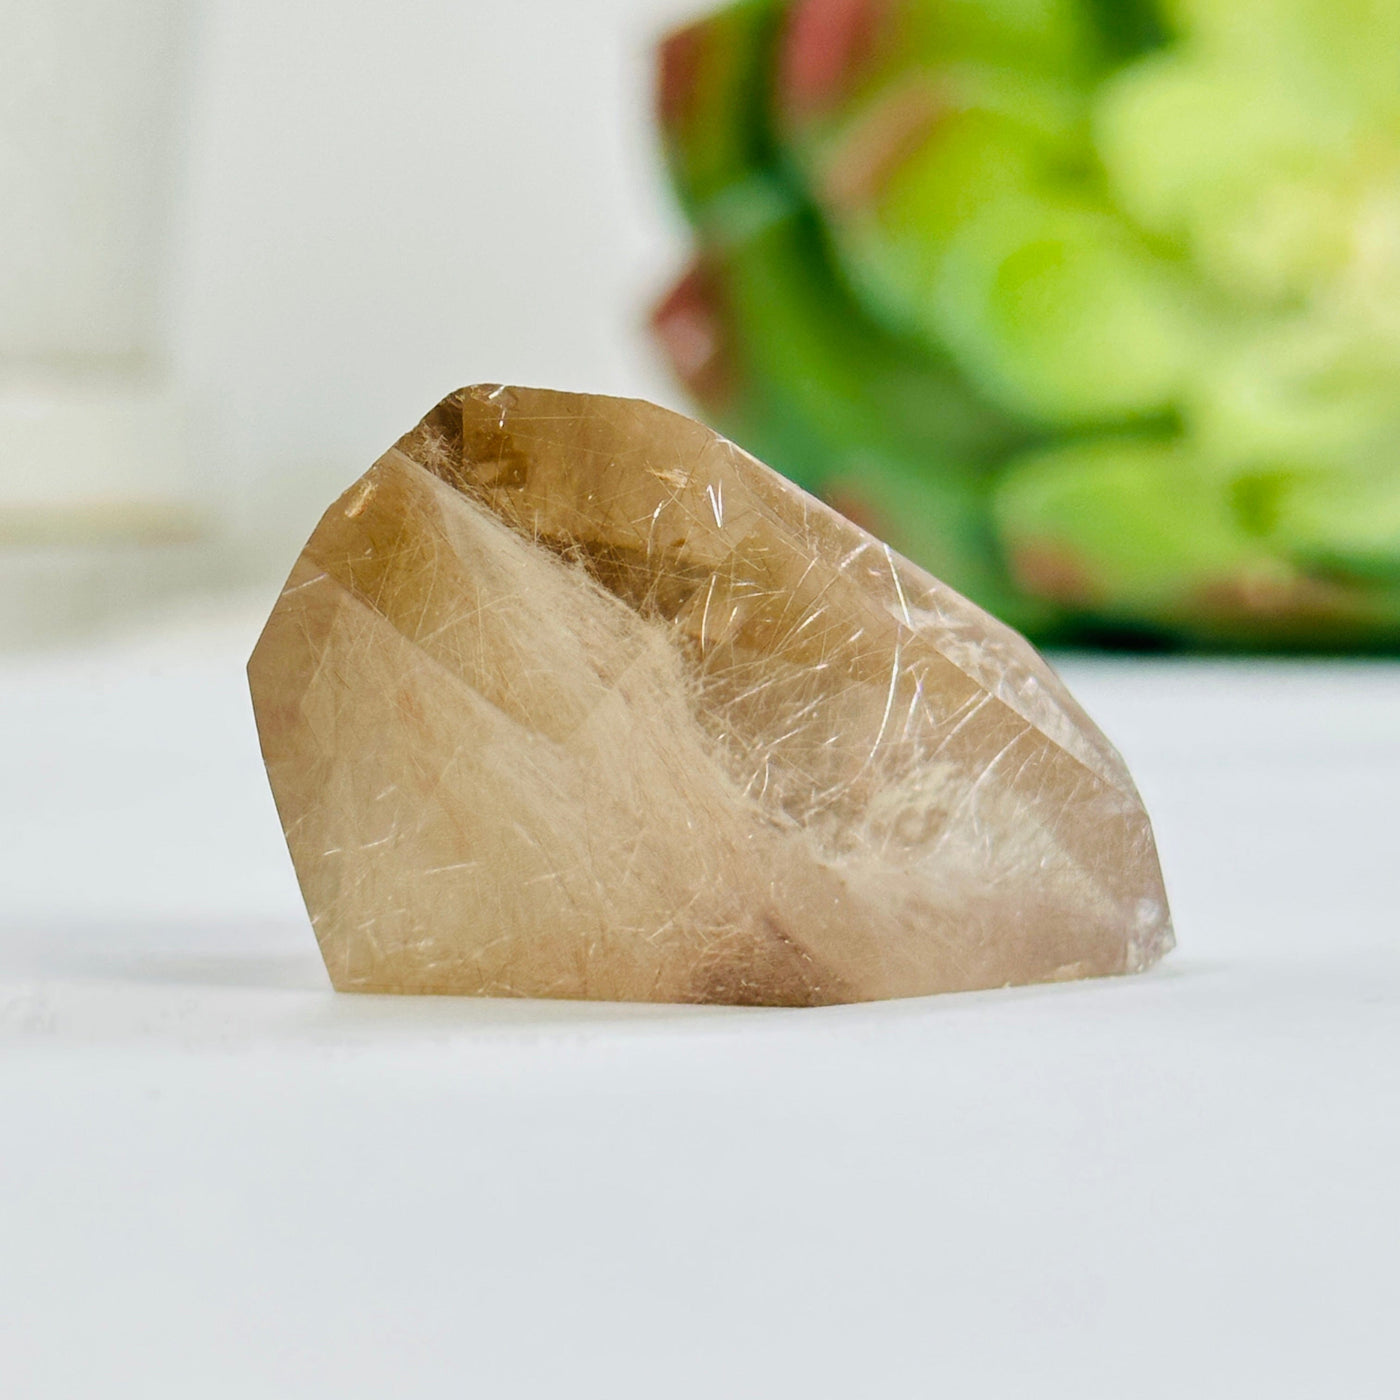 rutliated quartz with decorations in the background